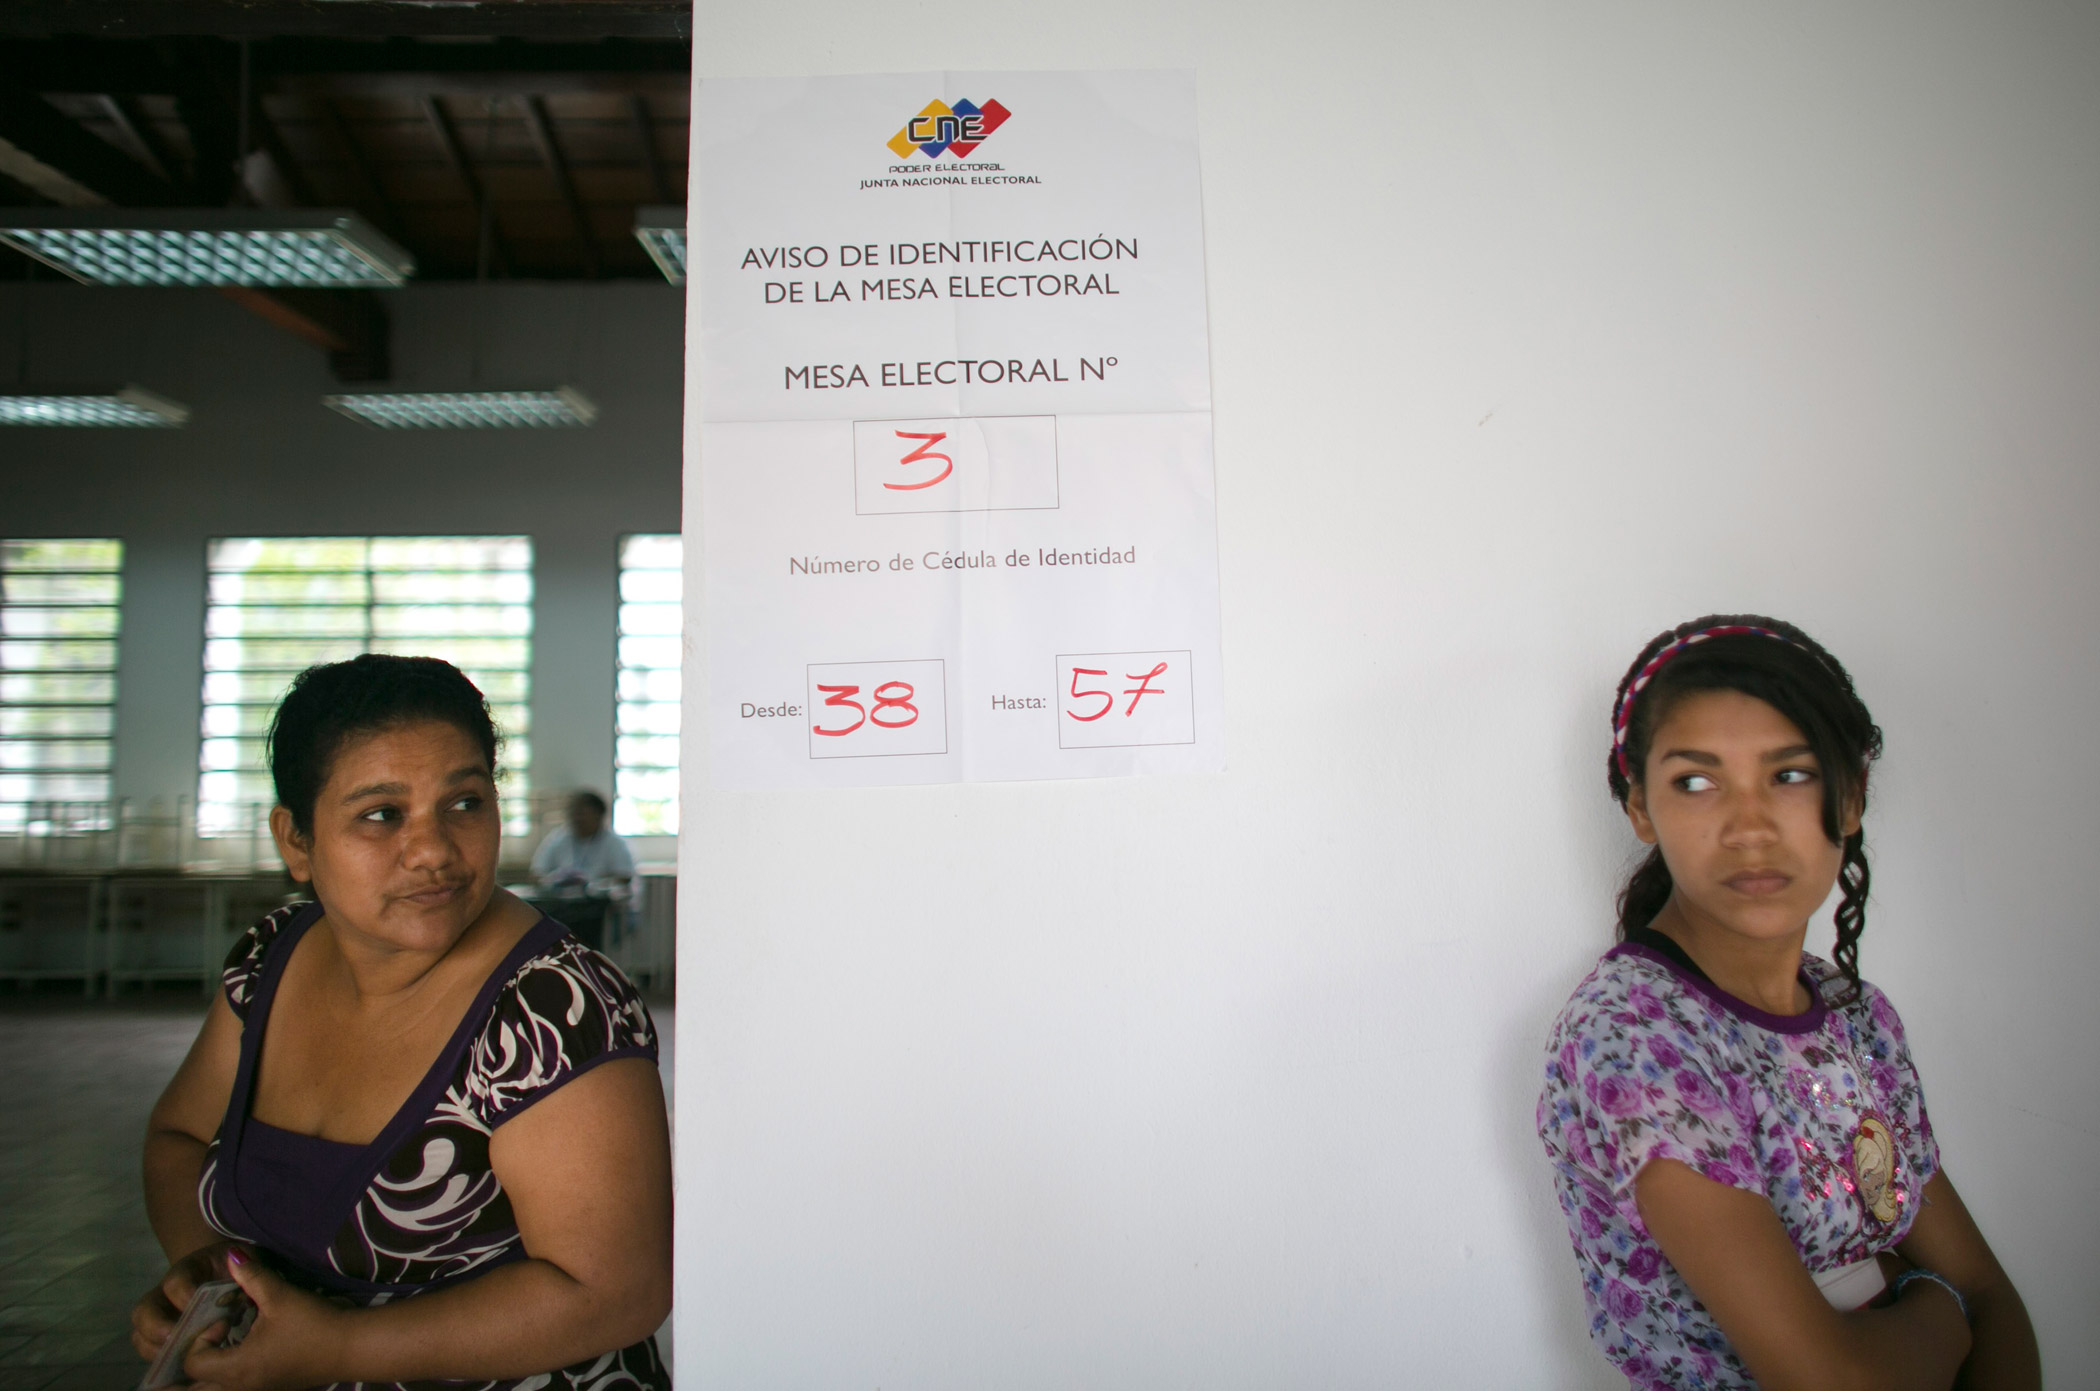 Voters wait to vote at a poll station during ruling party primary elections in Caracas, Venezuela, on June 28, 2015. (Ariana Cubillos—AP)